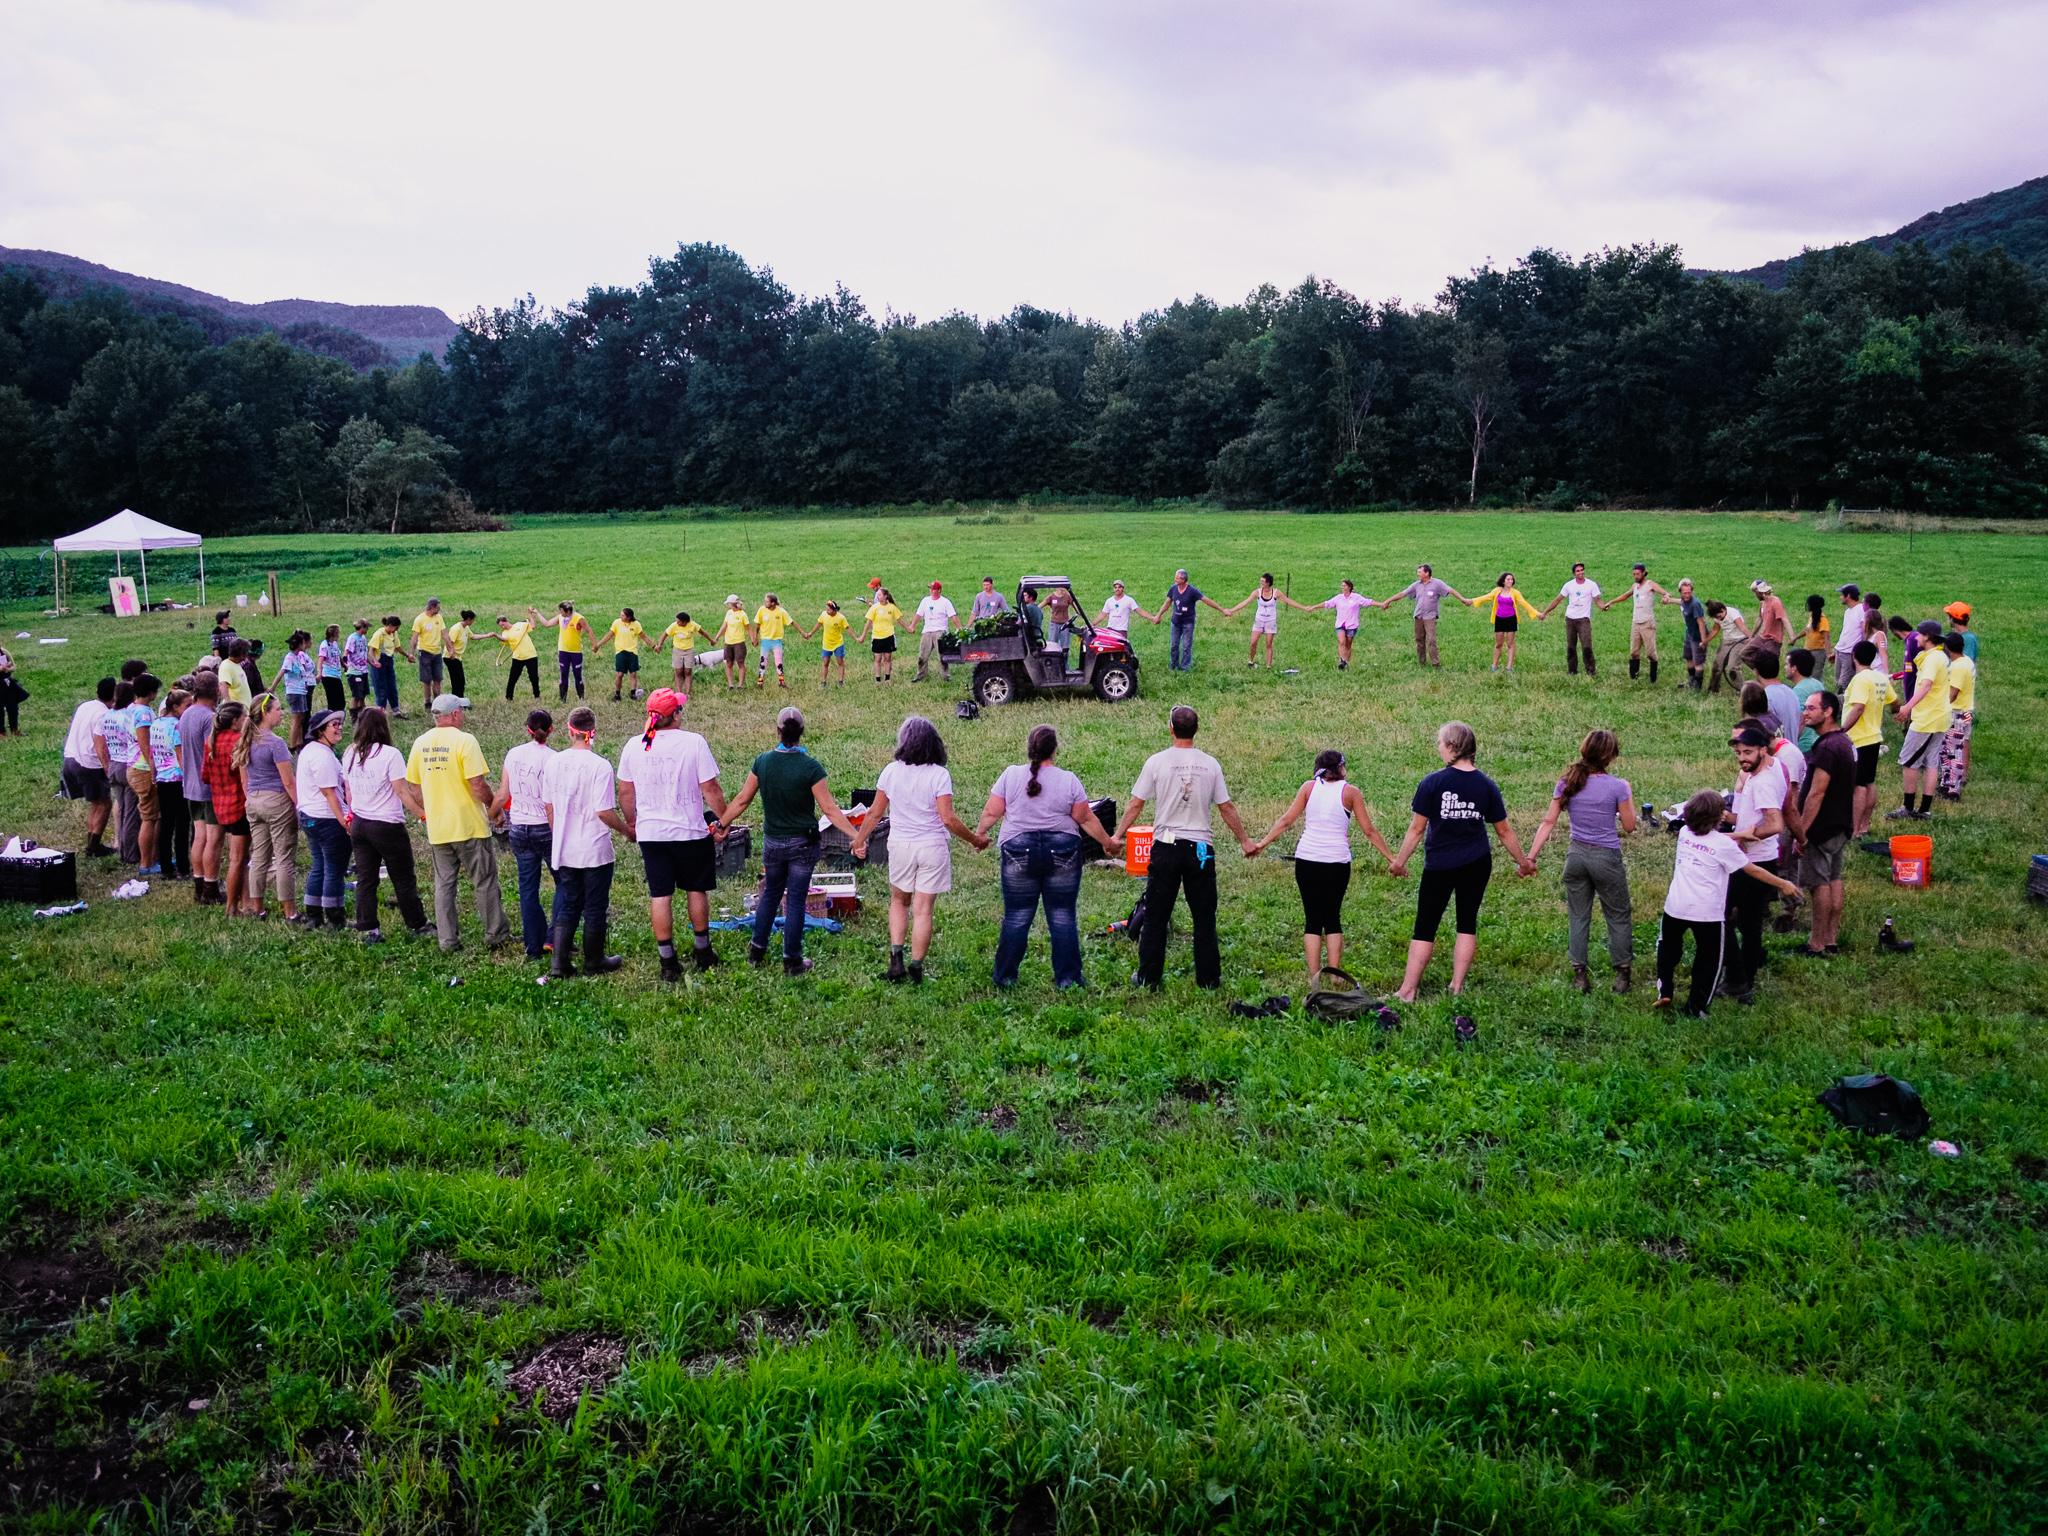 A large group of people stands on a field holding hands in a circle.